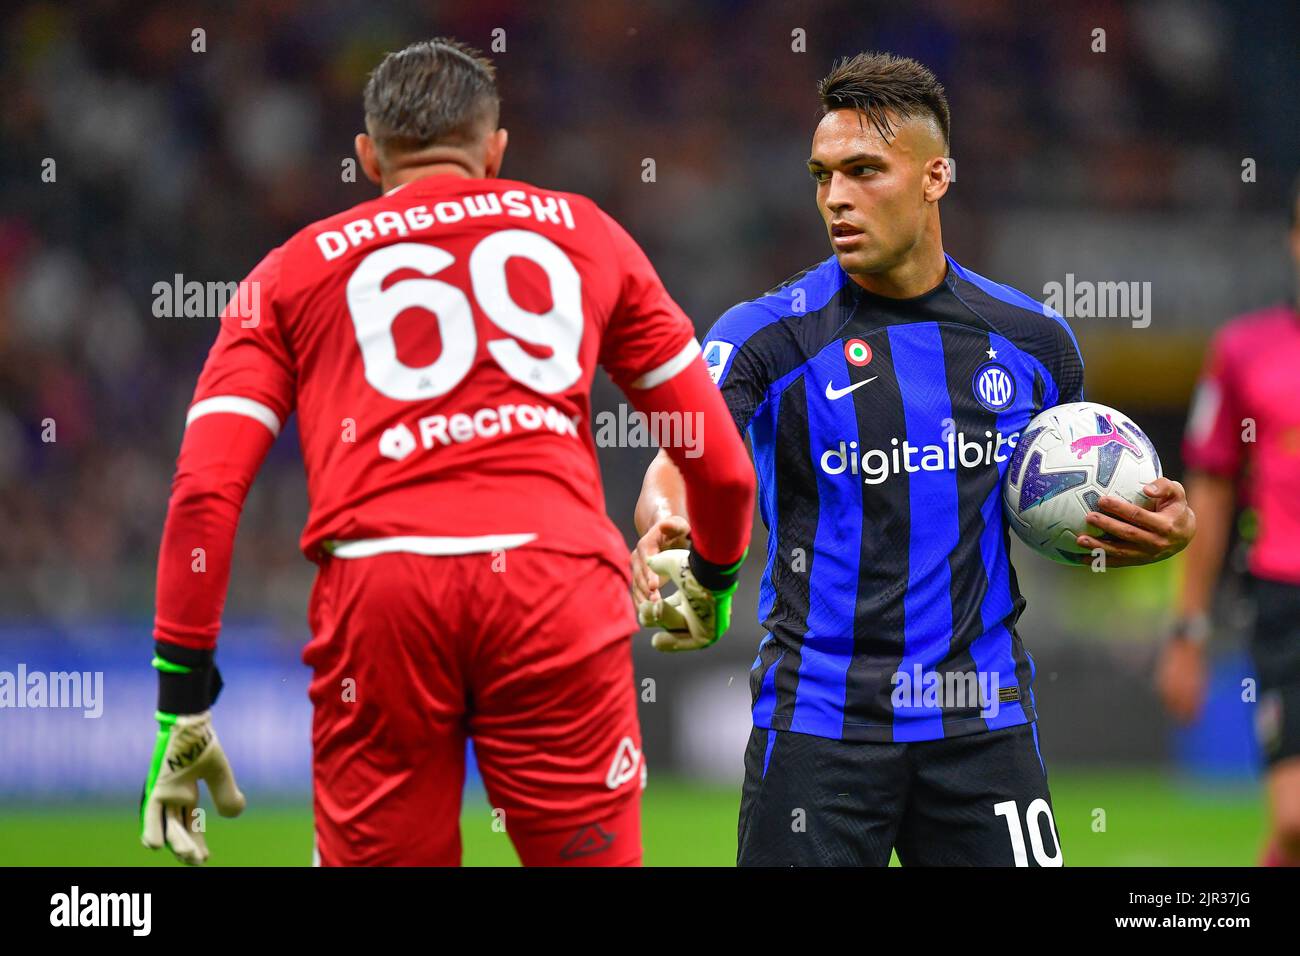 Milano, Italy. 20th, August 2022. Lautaro Martinez (10) of Inter and goalkeeper Bartlomiej Dragowski (69) of Spezia seen during the Serie A match between Inter and Spezia at Giuseppe Meazza in Milano. (Photo credit: Gonzales Photo - Tommaso Fimiano). Stock Photo